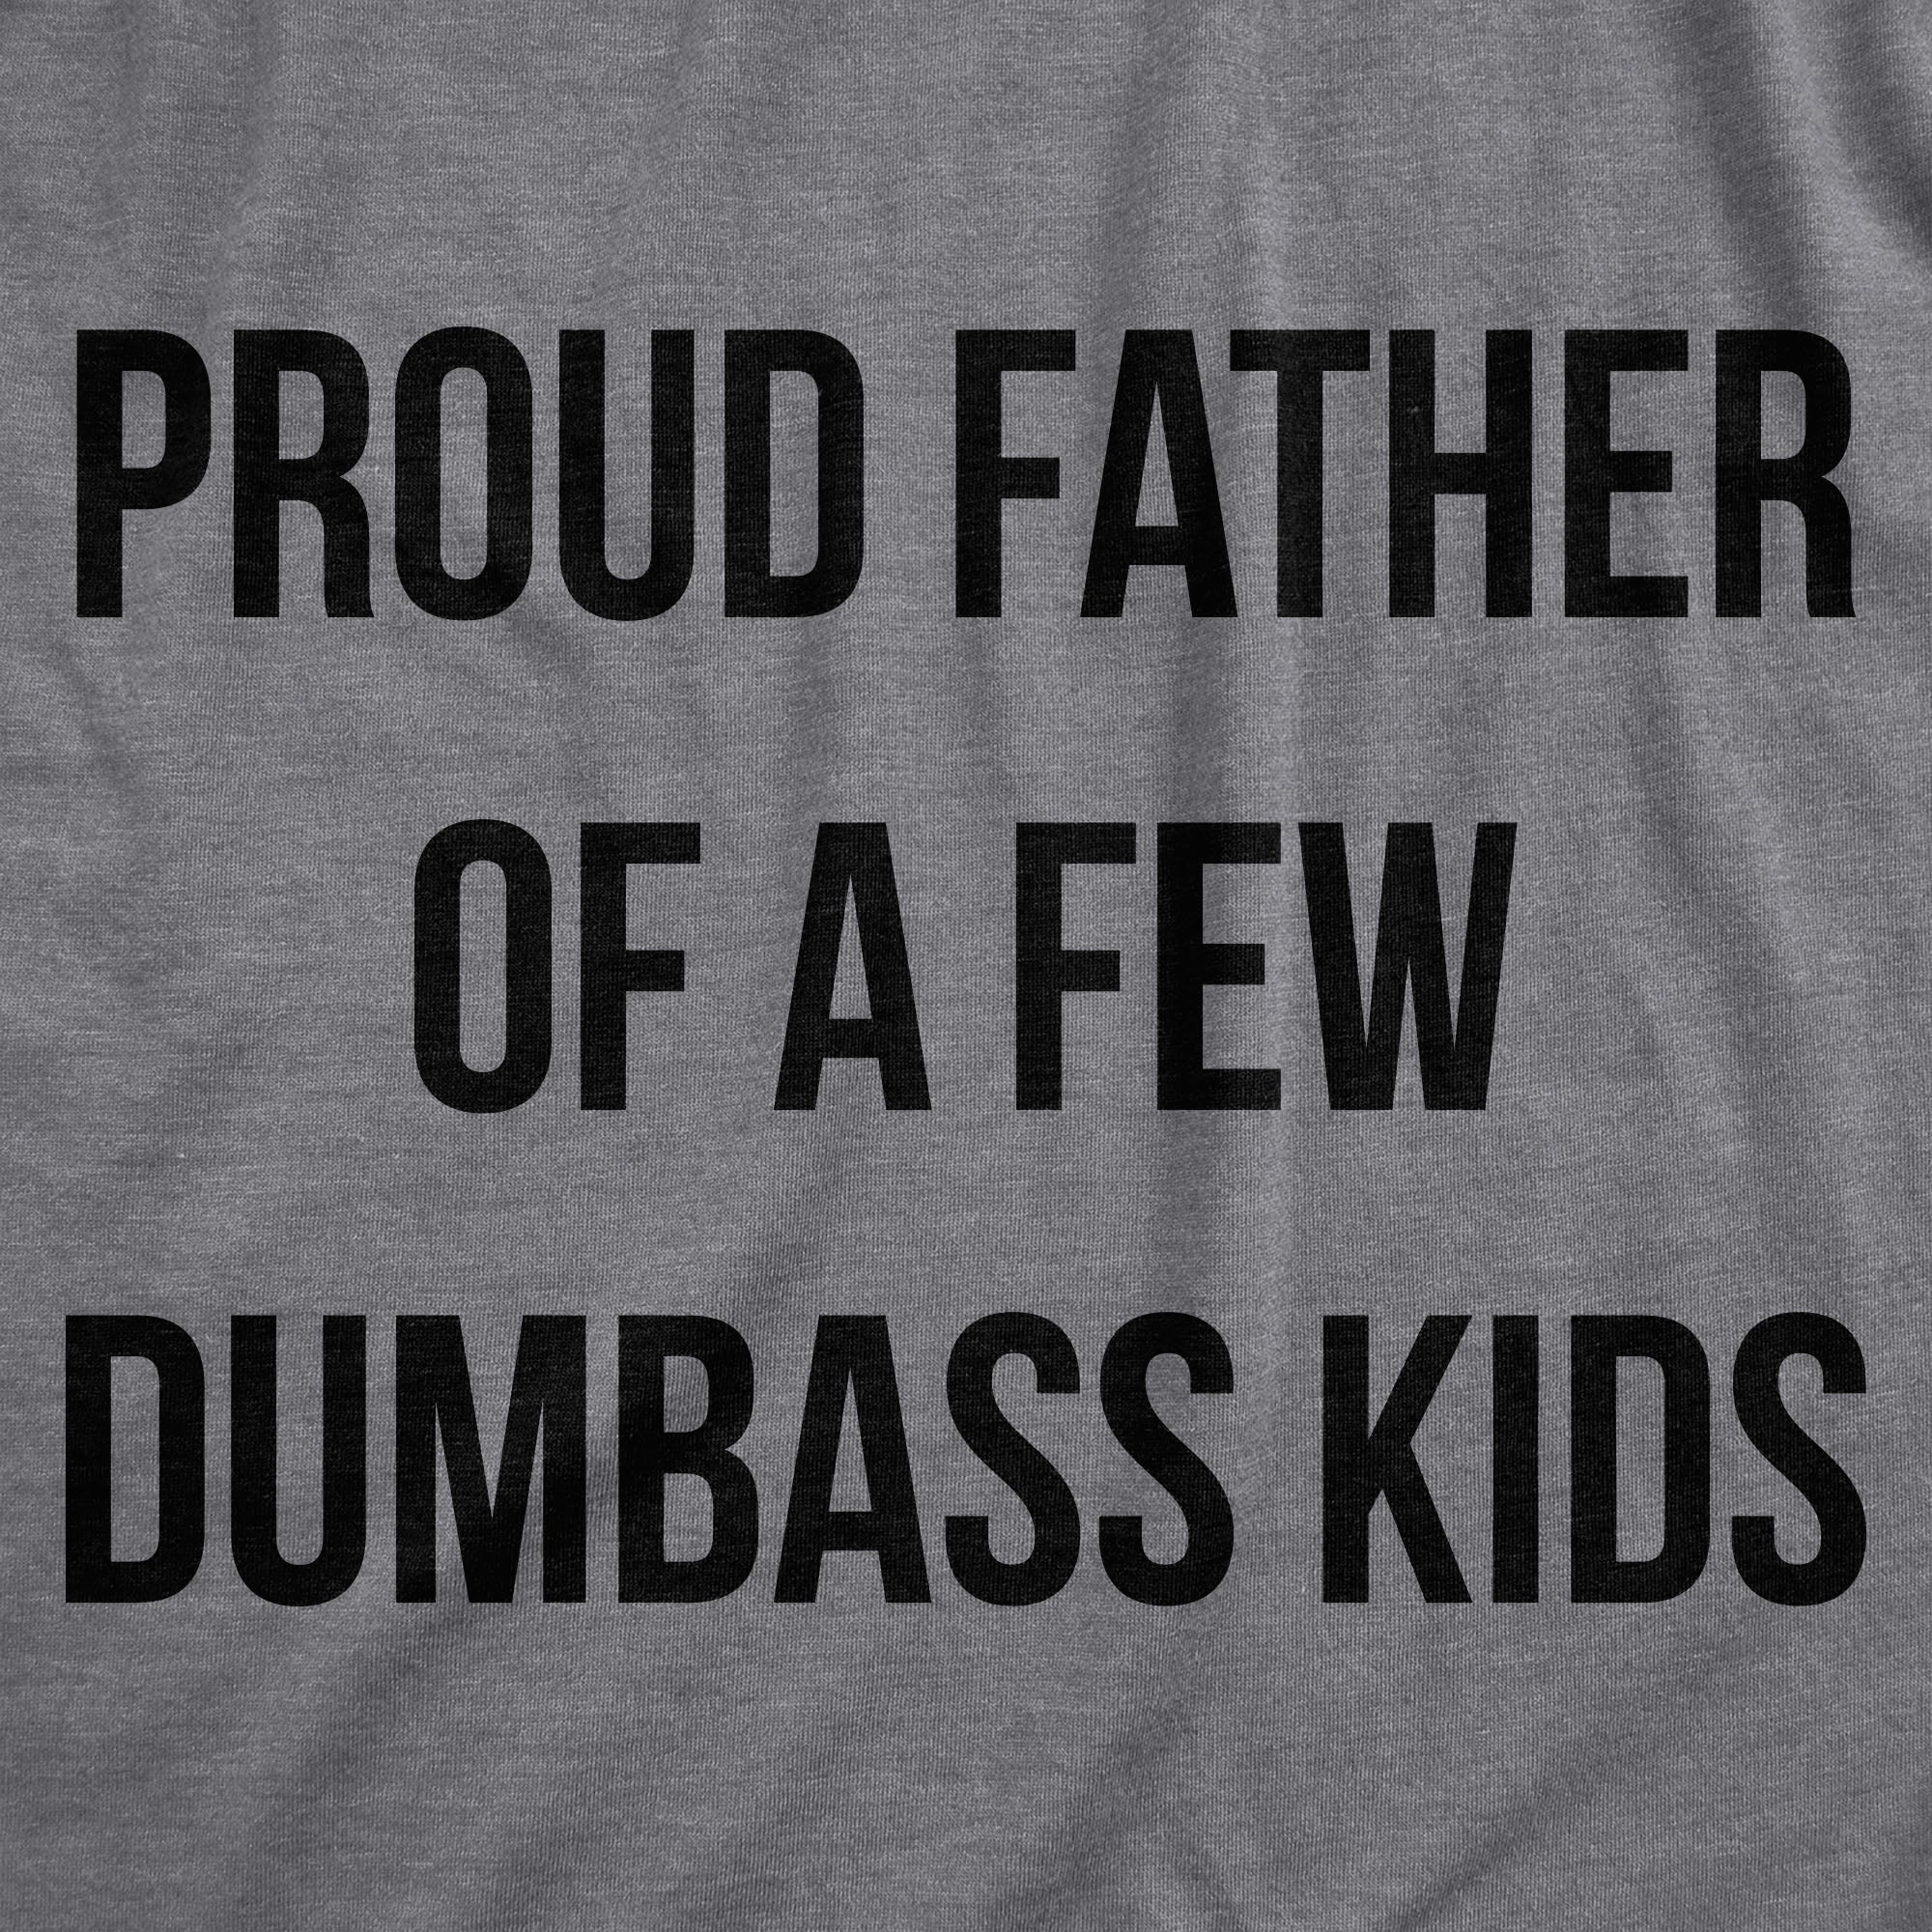 Funny Dark Heather Grey - Proud Father Kids Proud Father Of A Few Dumbass Kids Hoodie Nerdy Father's Day sarcastic Tee